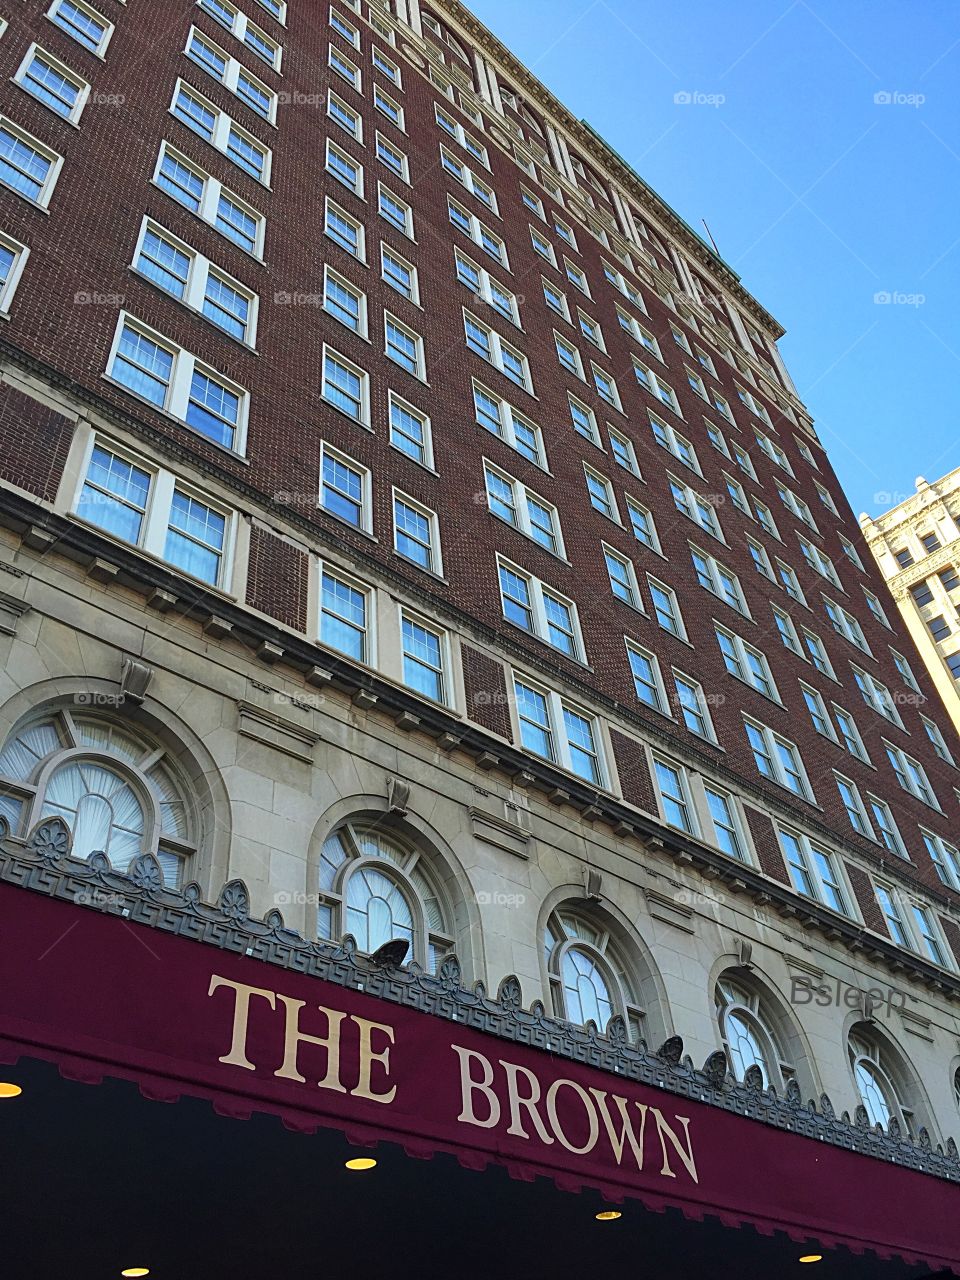 The Brown Hotel